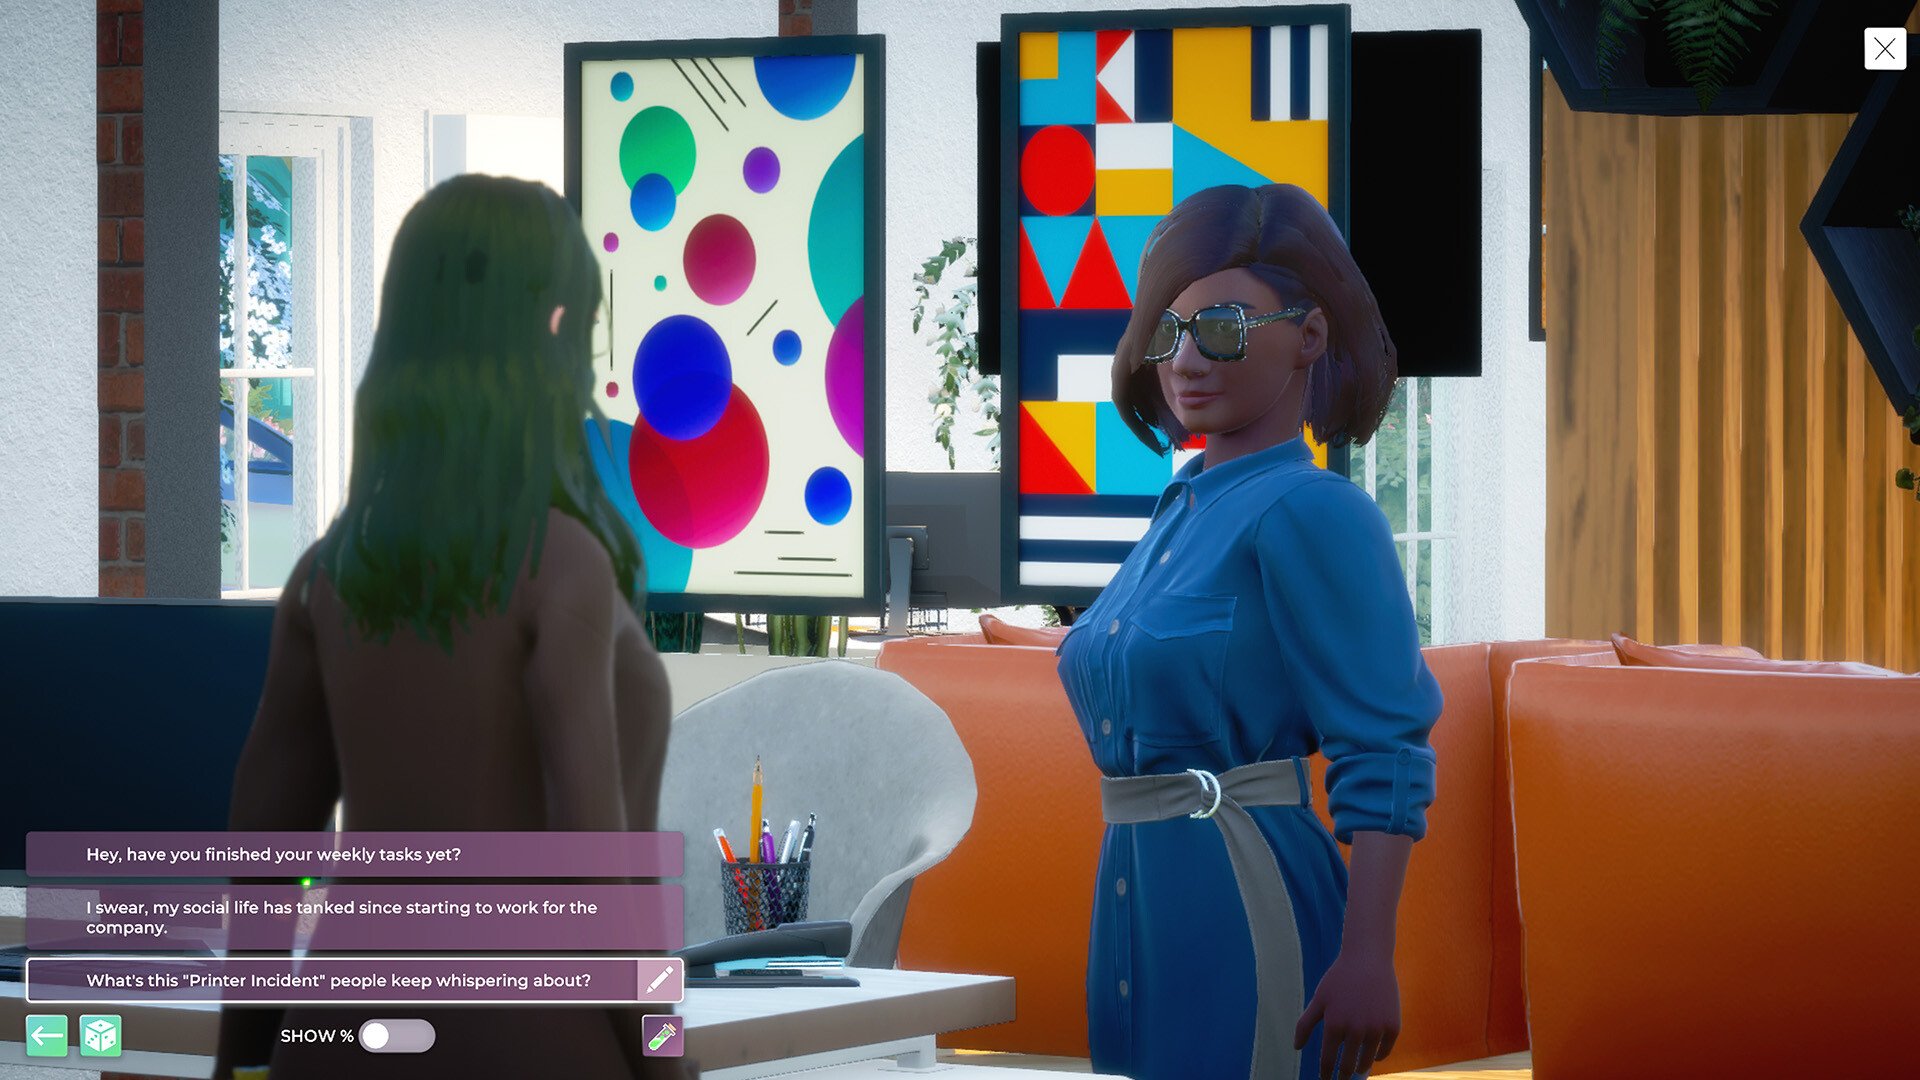 Sims Rival Life By You has been delayed again, this time indefinitely